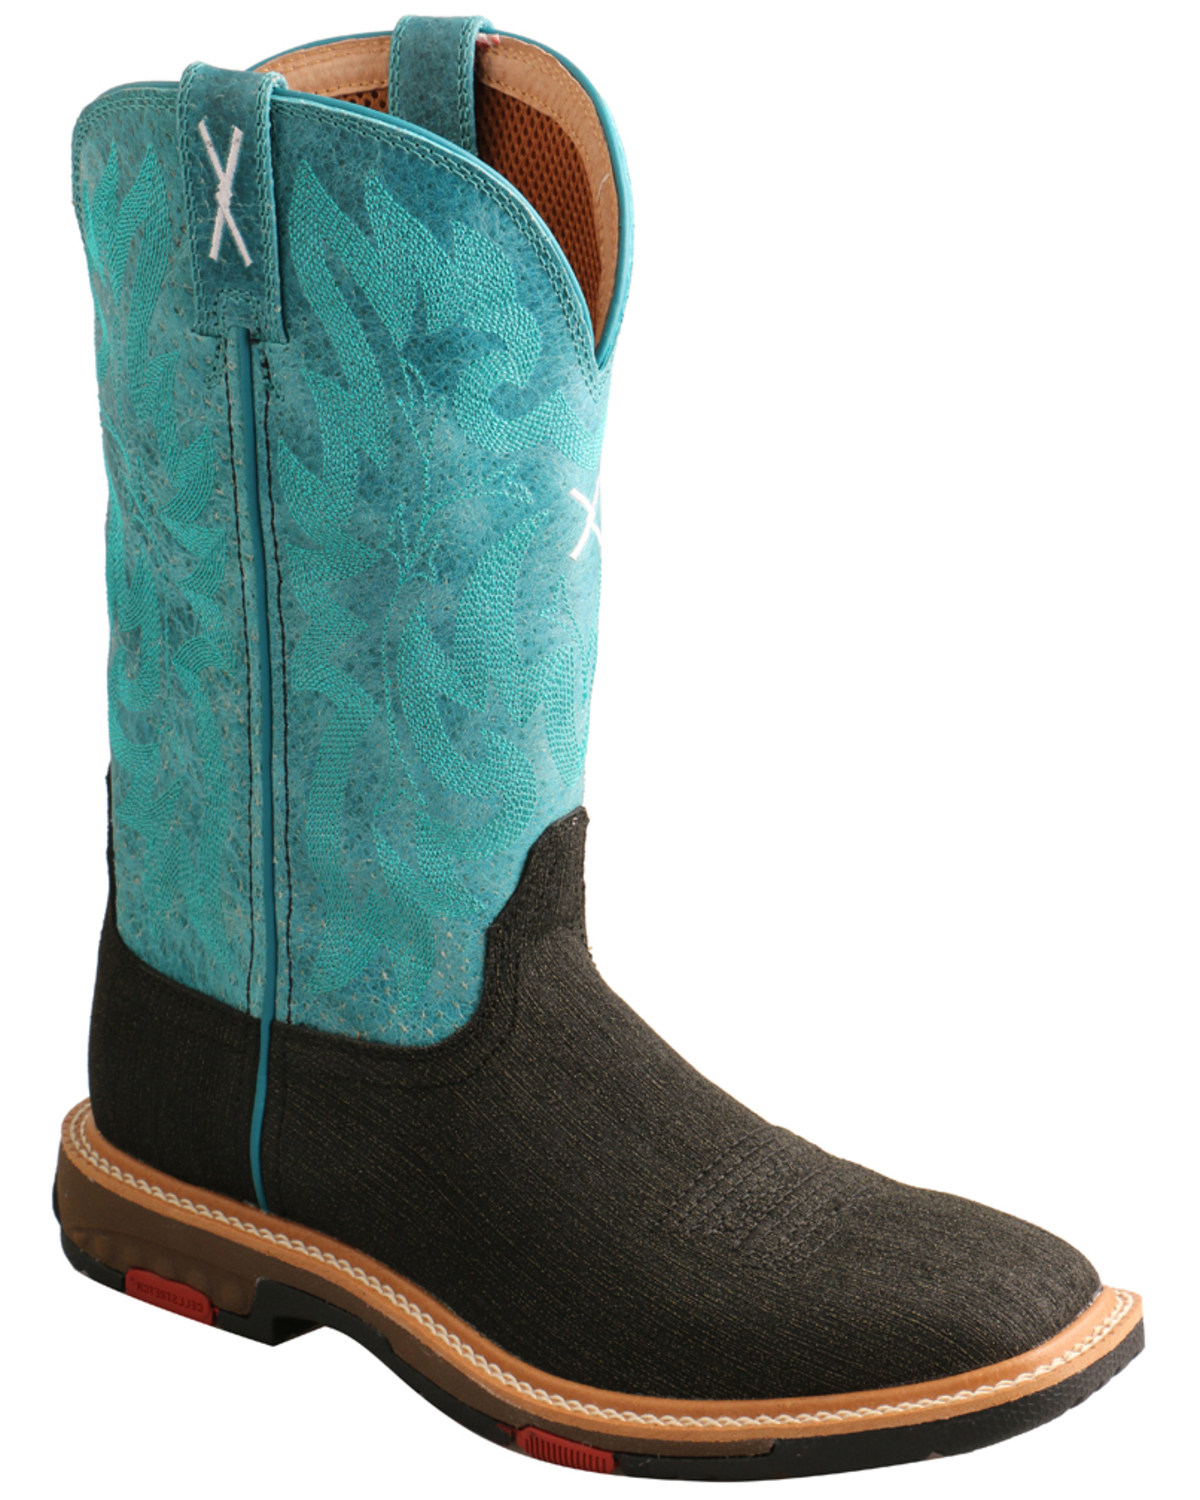 Twisted X Women's Western Work Boots - Alloy Toe